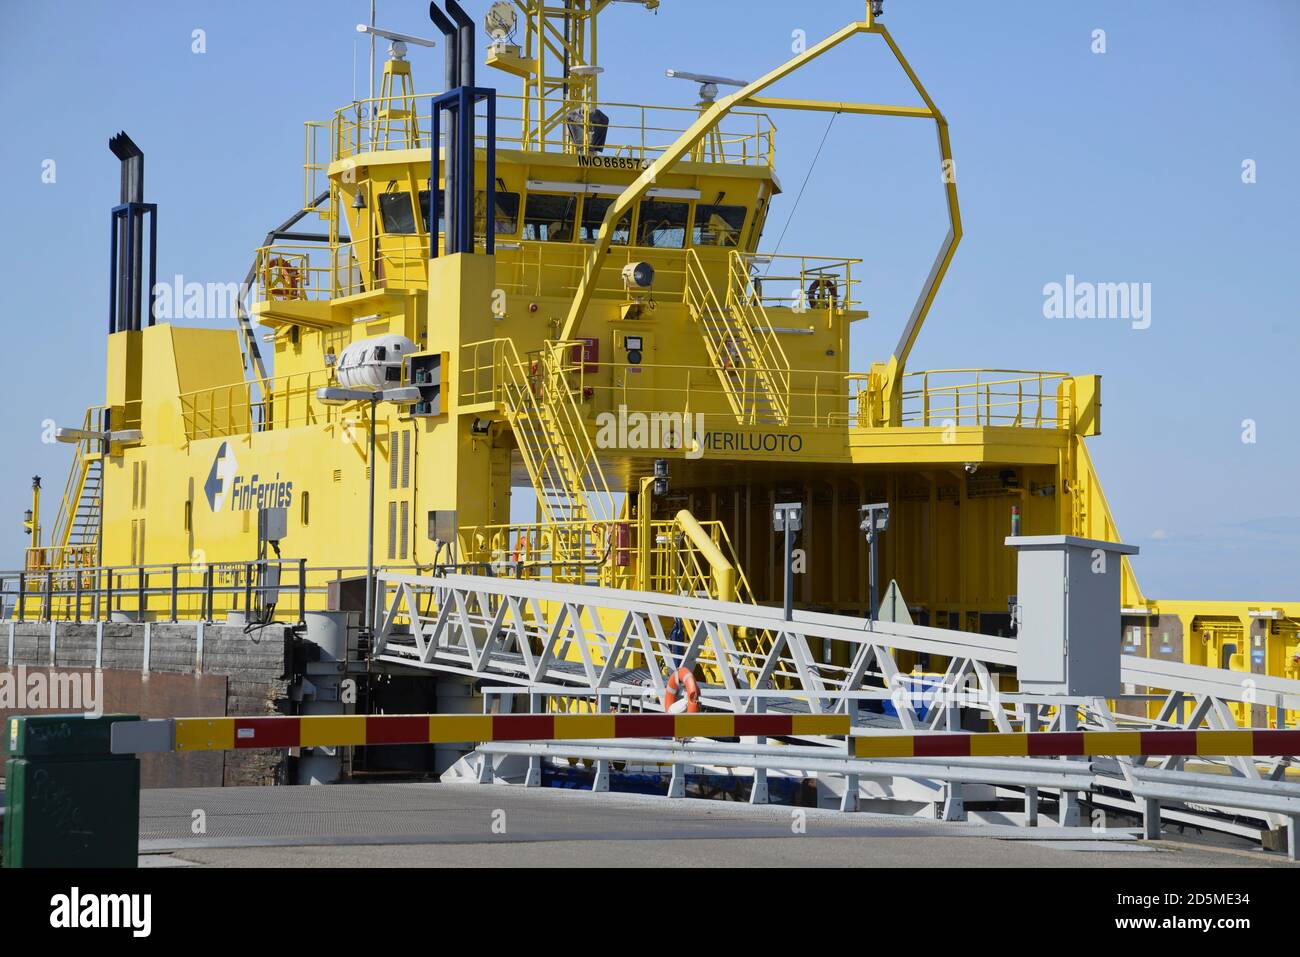 Ferry in going to Hailuoto island in Oulunsalo, Finland Stock Photo